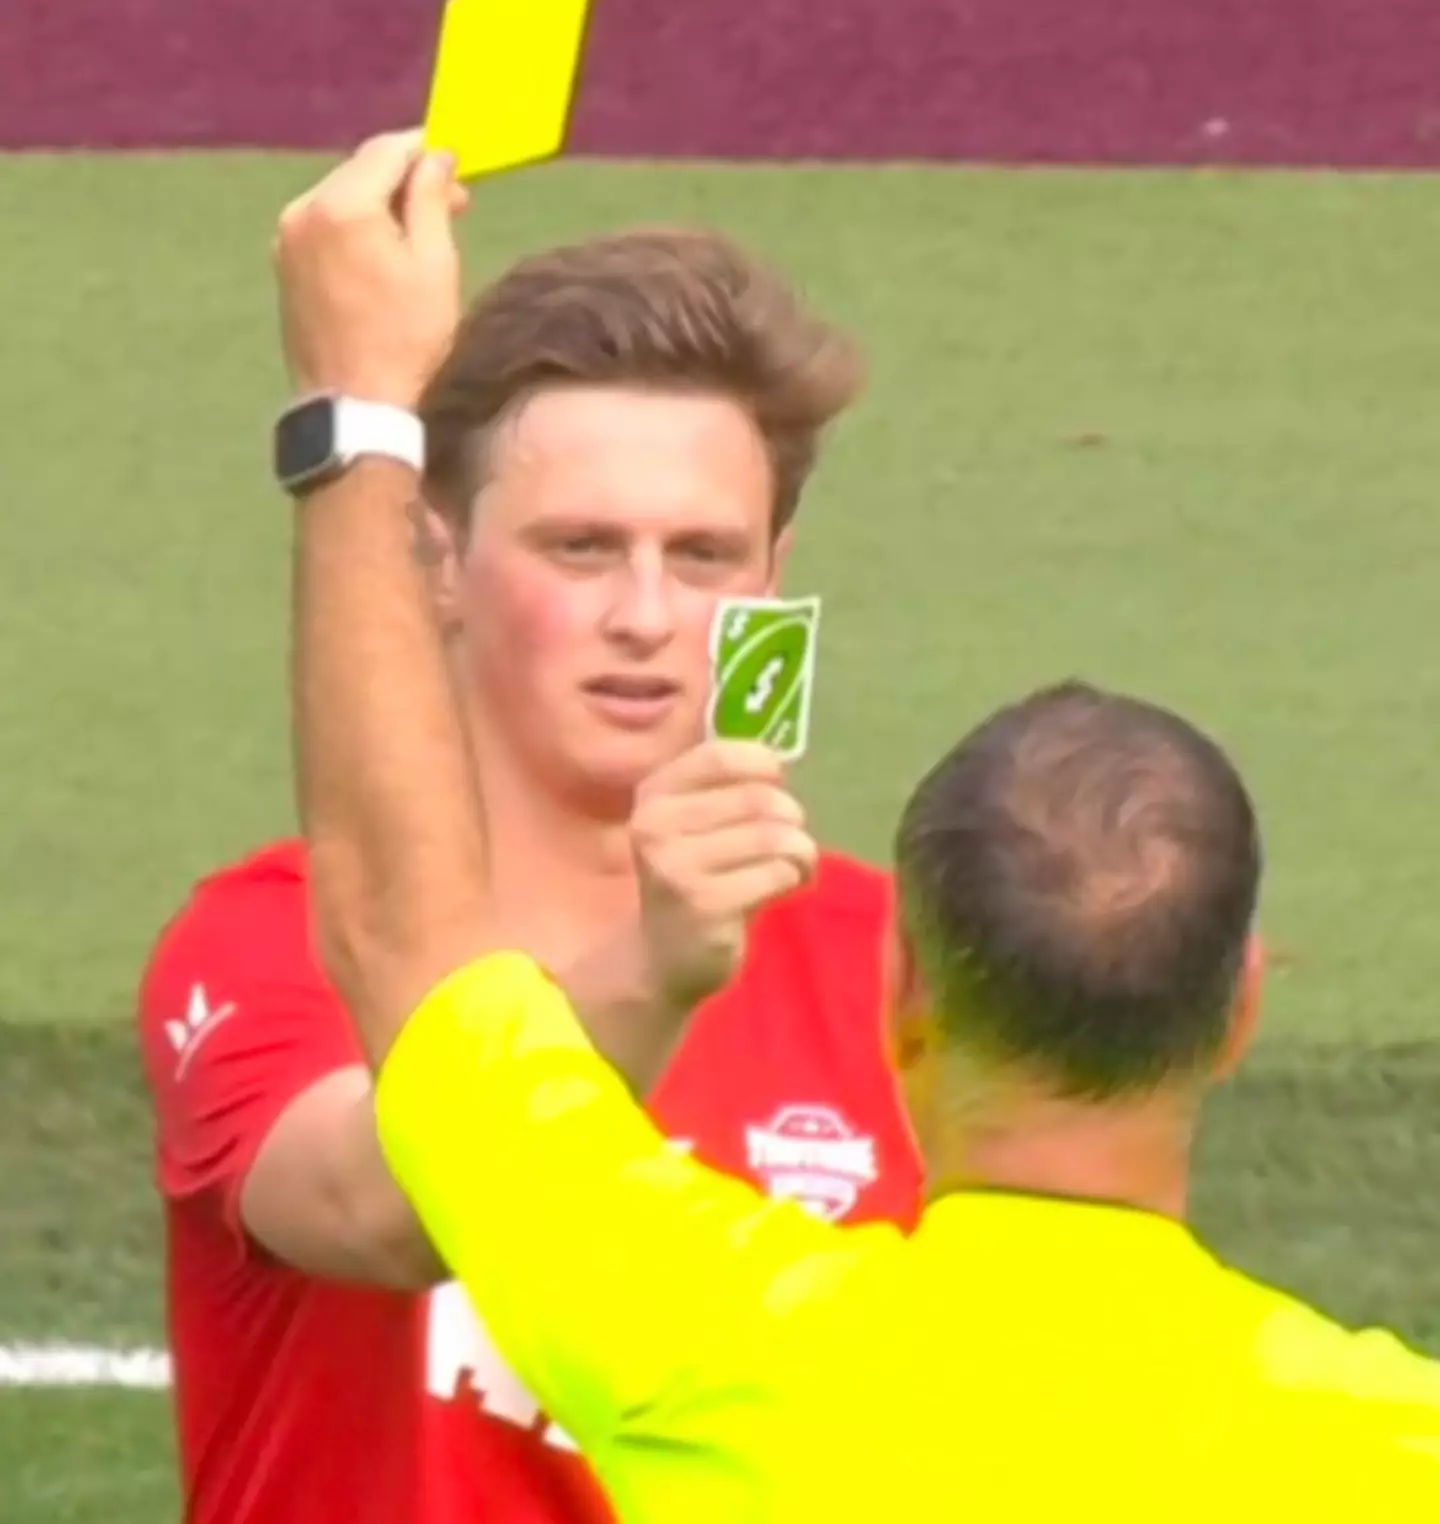 Max Fosh pulled out an Uno reverse card during the charity match.